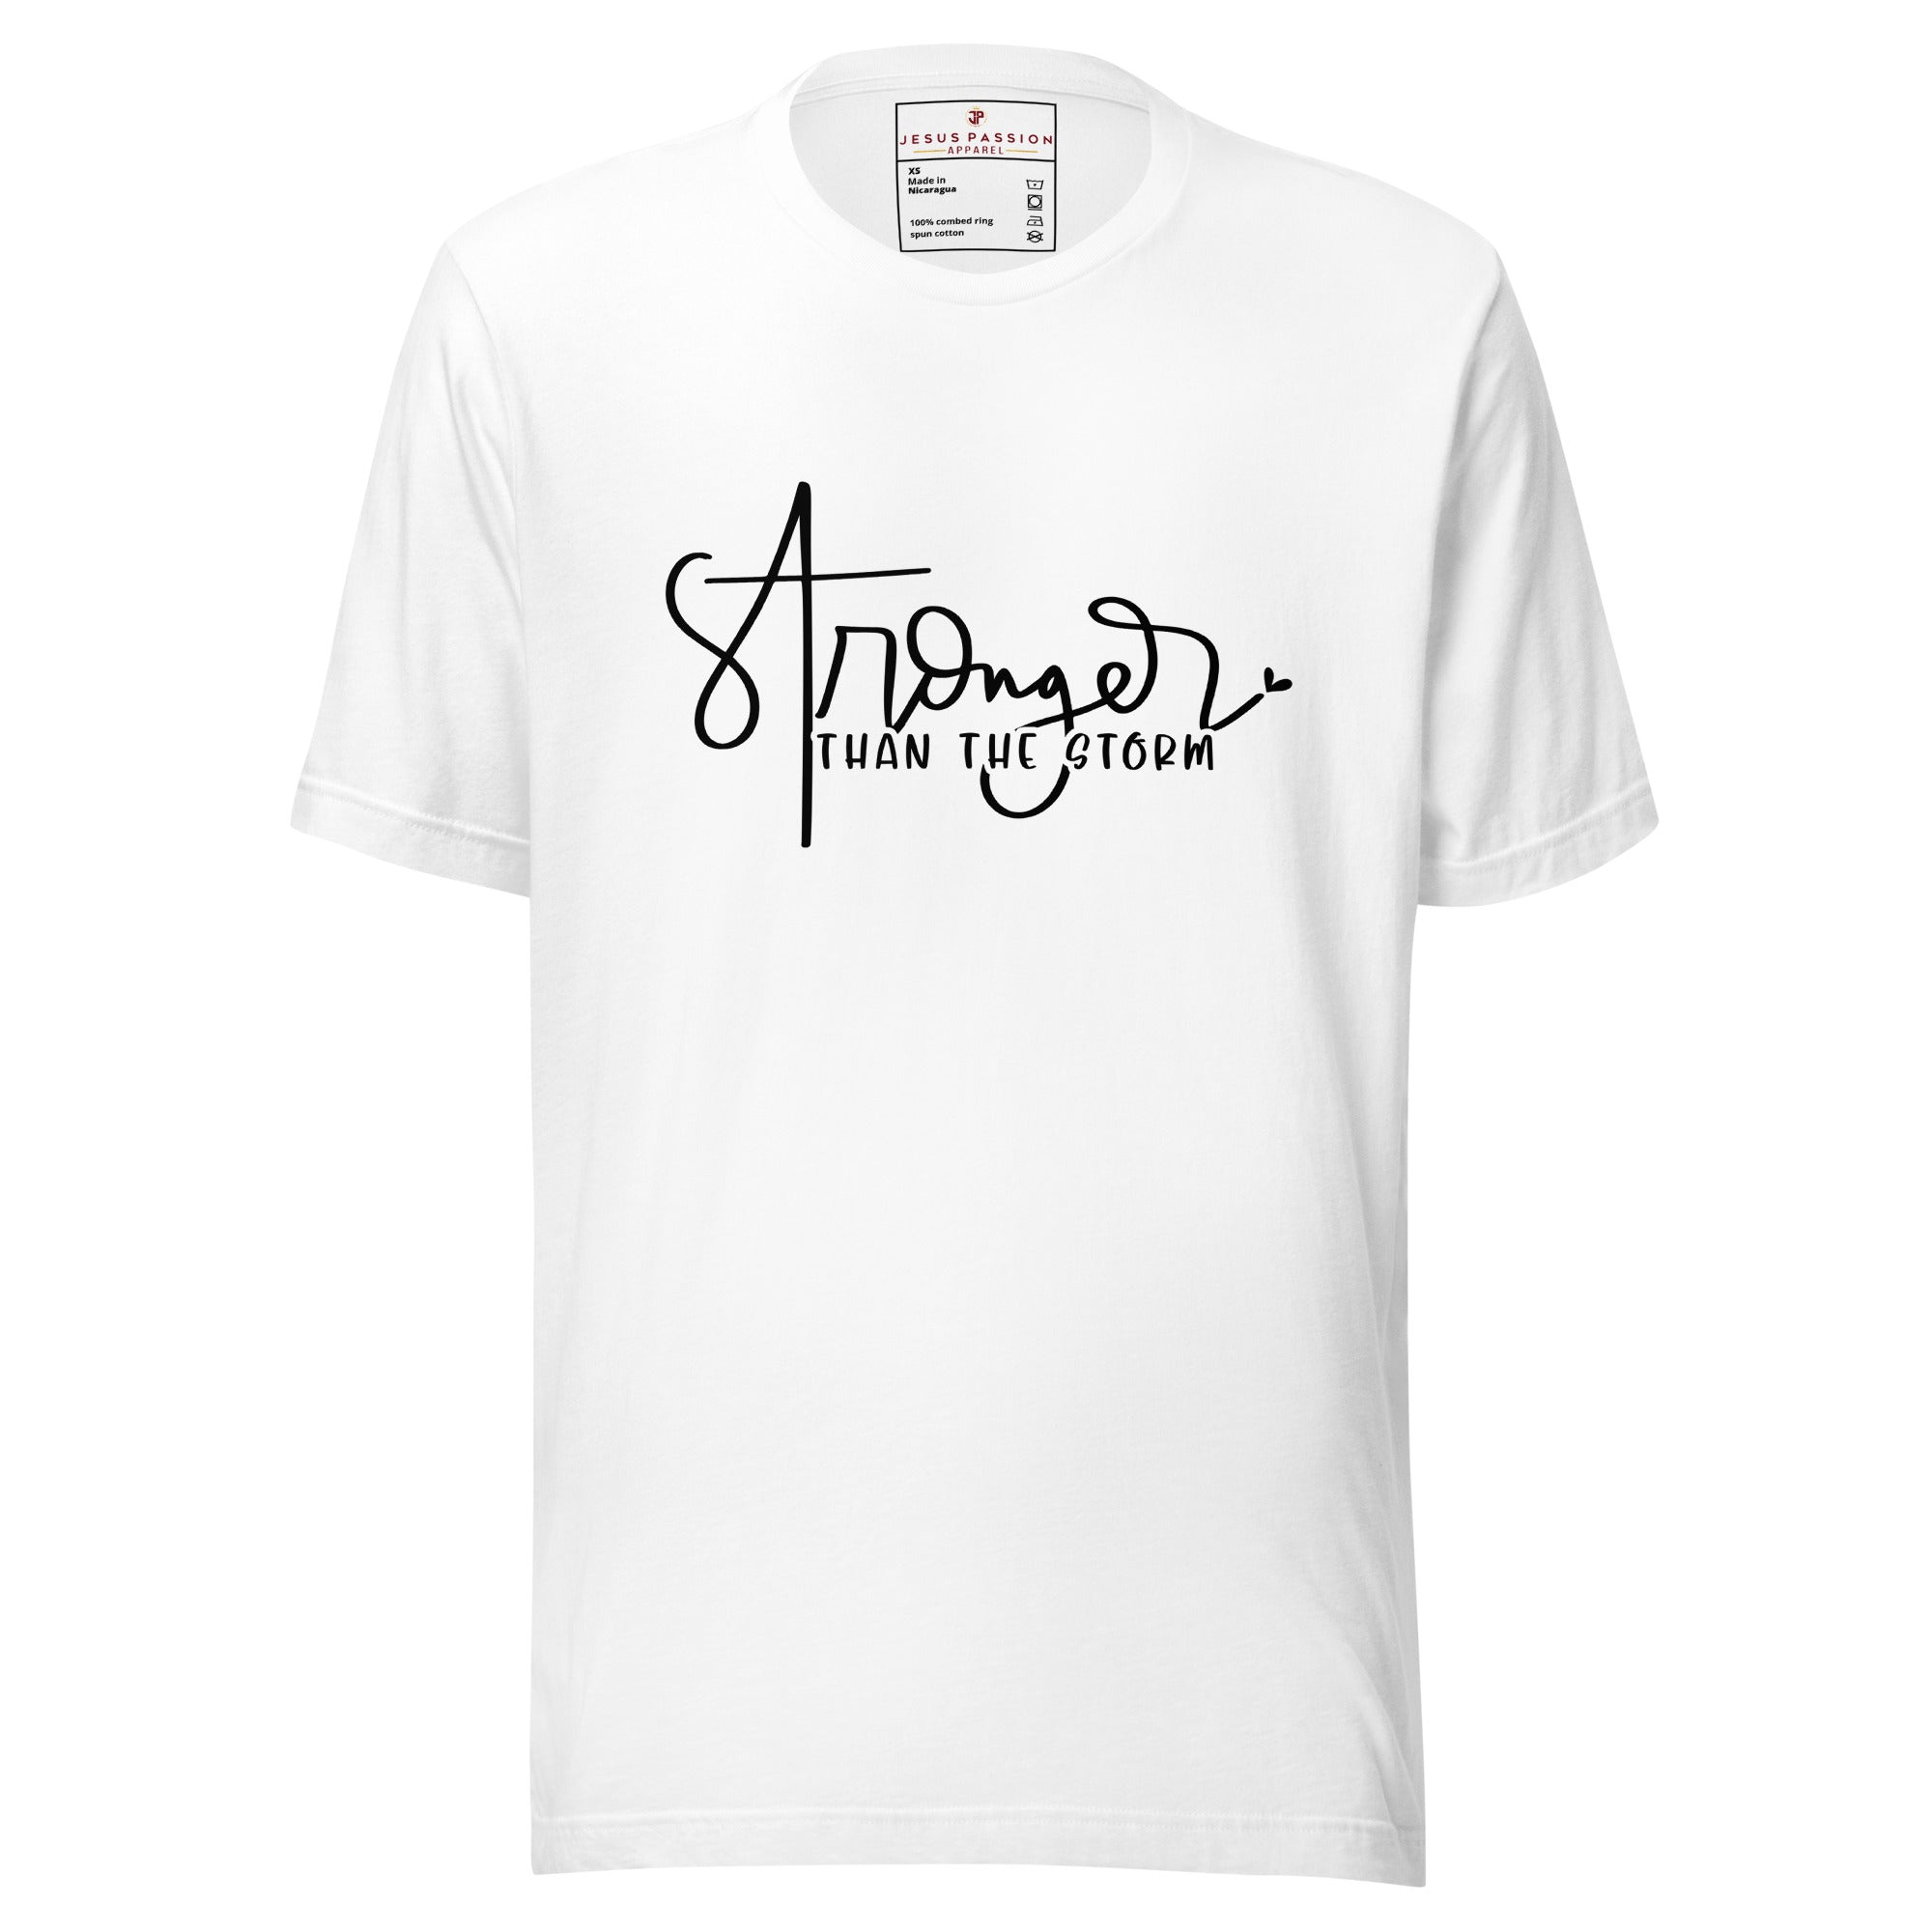 Stronger Than The Storm Jersey Short Sleeve T-Shirt Color: White Size: XS Jesus Passion Apparel